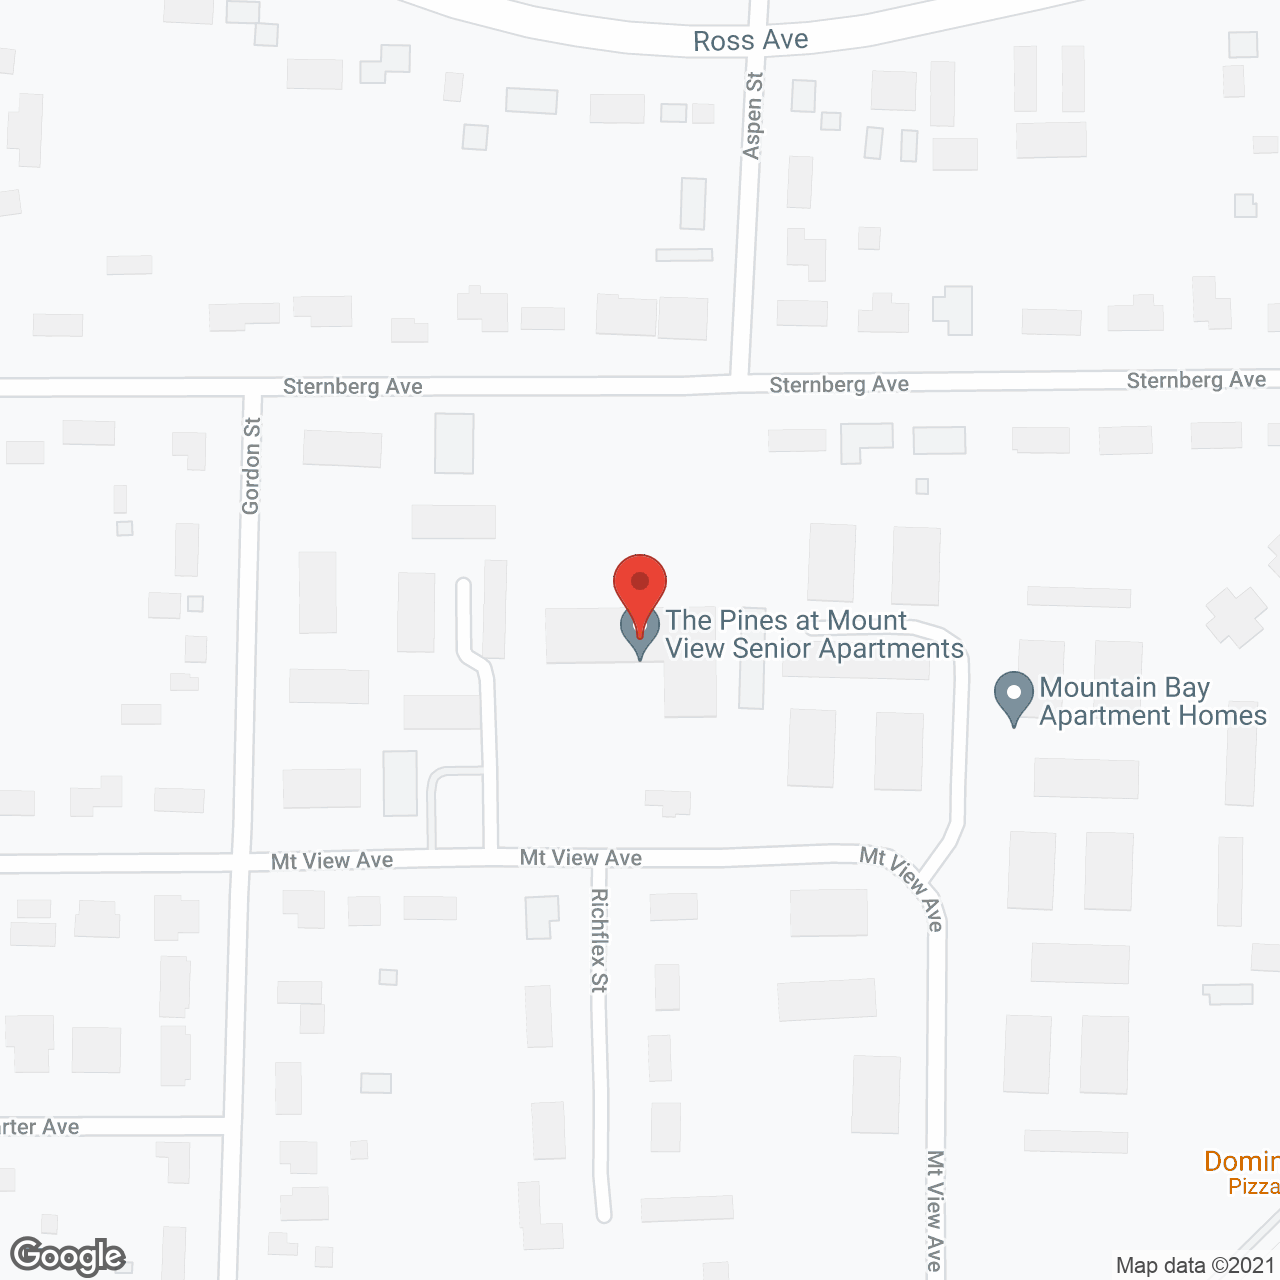 The Pines Apartments in google map